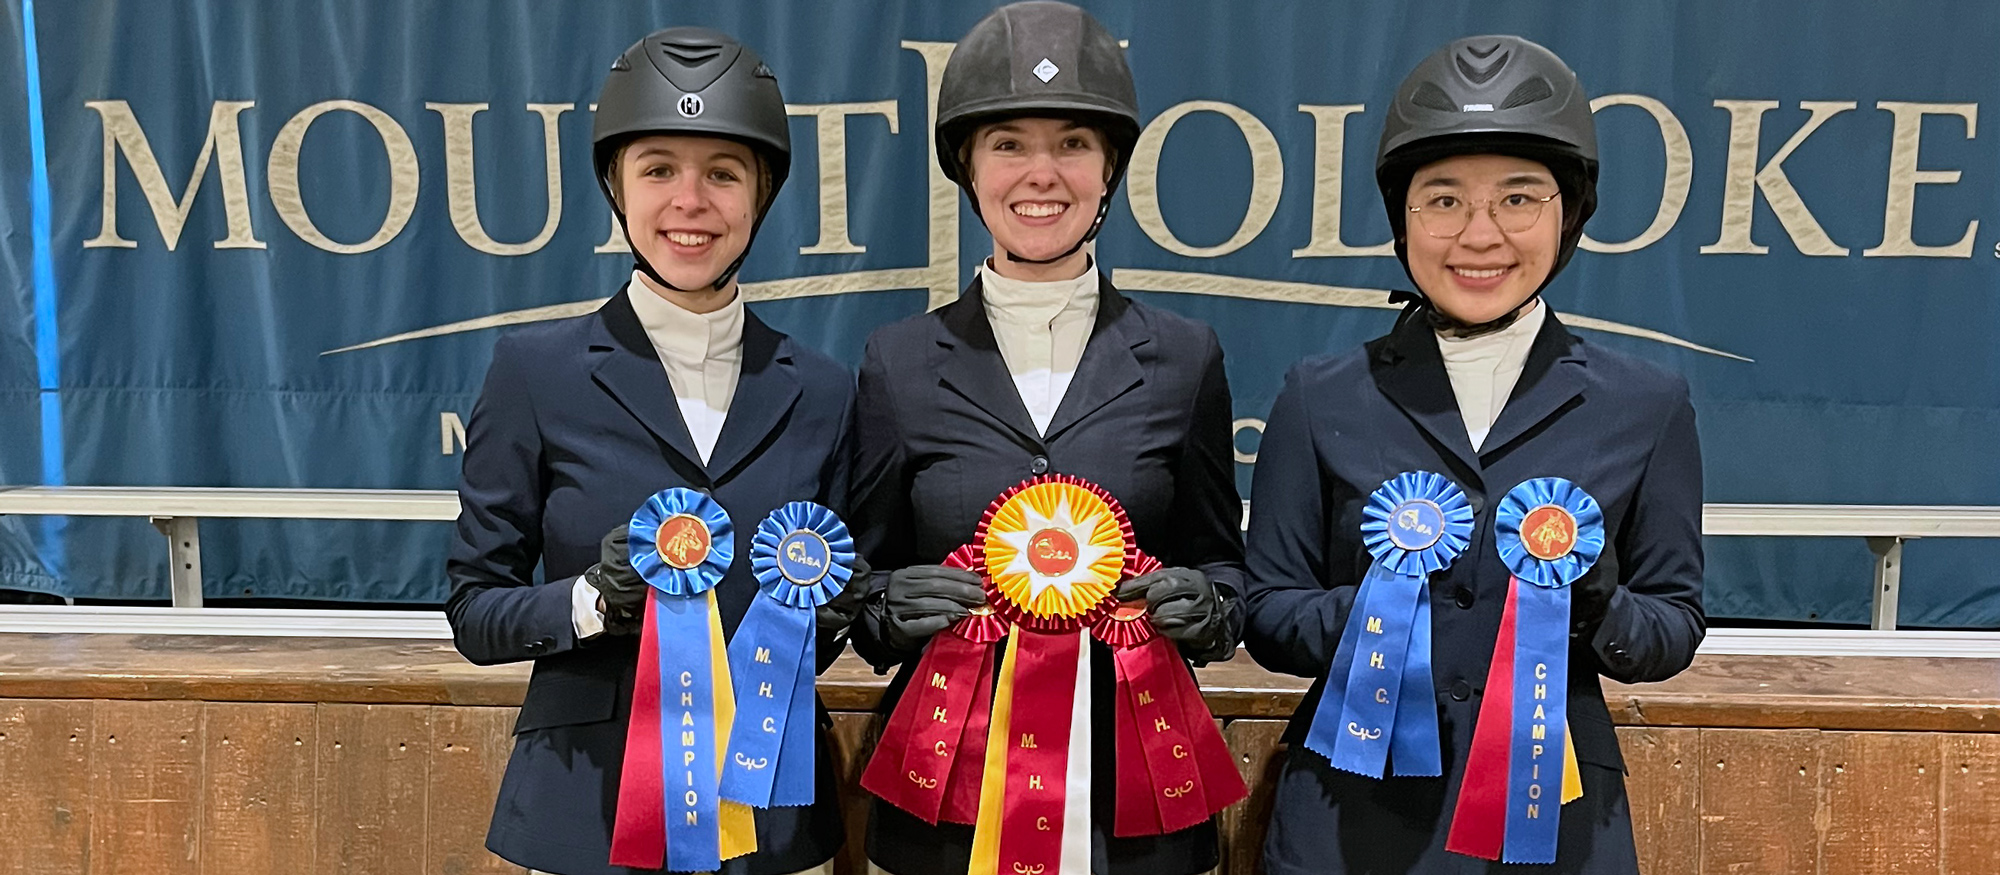 Ribbon winners (left to right) Alex Taylor (High Point Champion Novice Rider), Kristen Adolf (Reserve High Point Limit Rider) and Lingdang Zhang (High Point Introductory Rider) following the Mount Holyoke Show on Feb. 25, 2023.